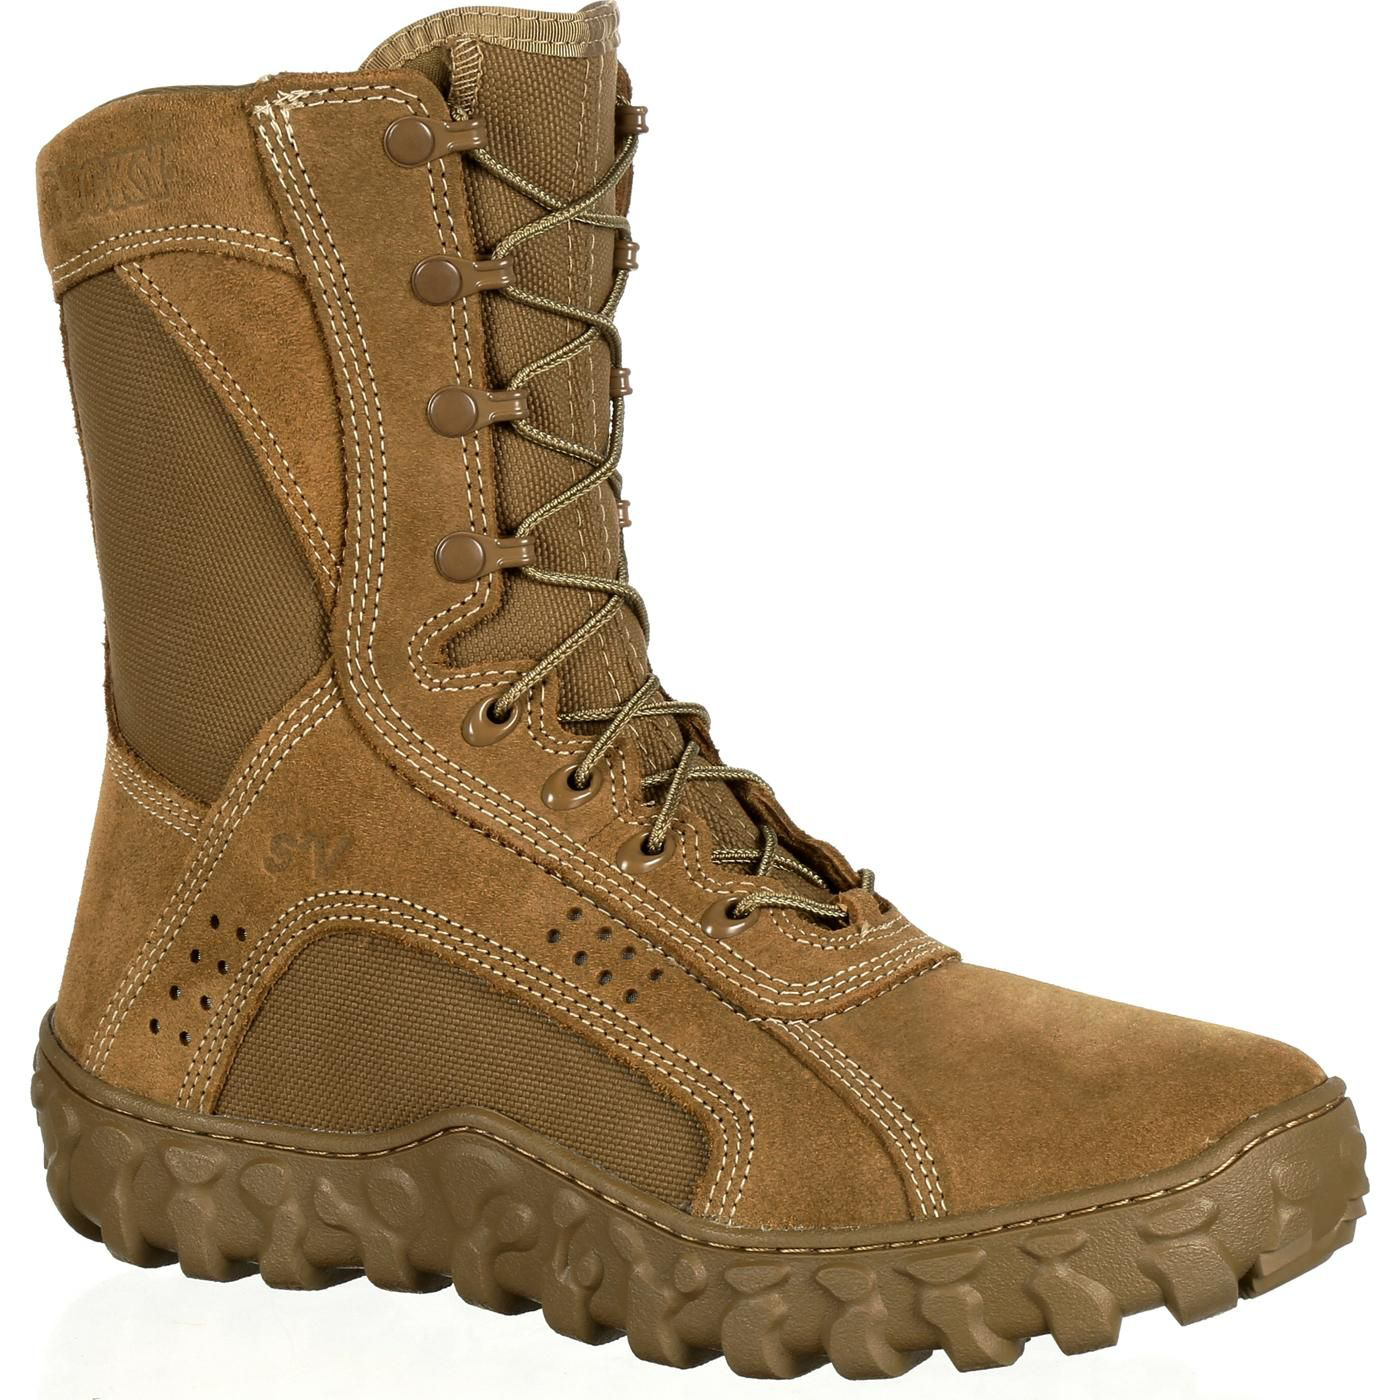 Rocky S2V Tactical Military Boots for Men - Coyote Brown - 5.5W